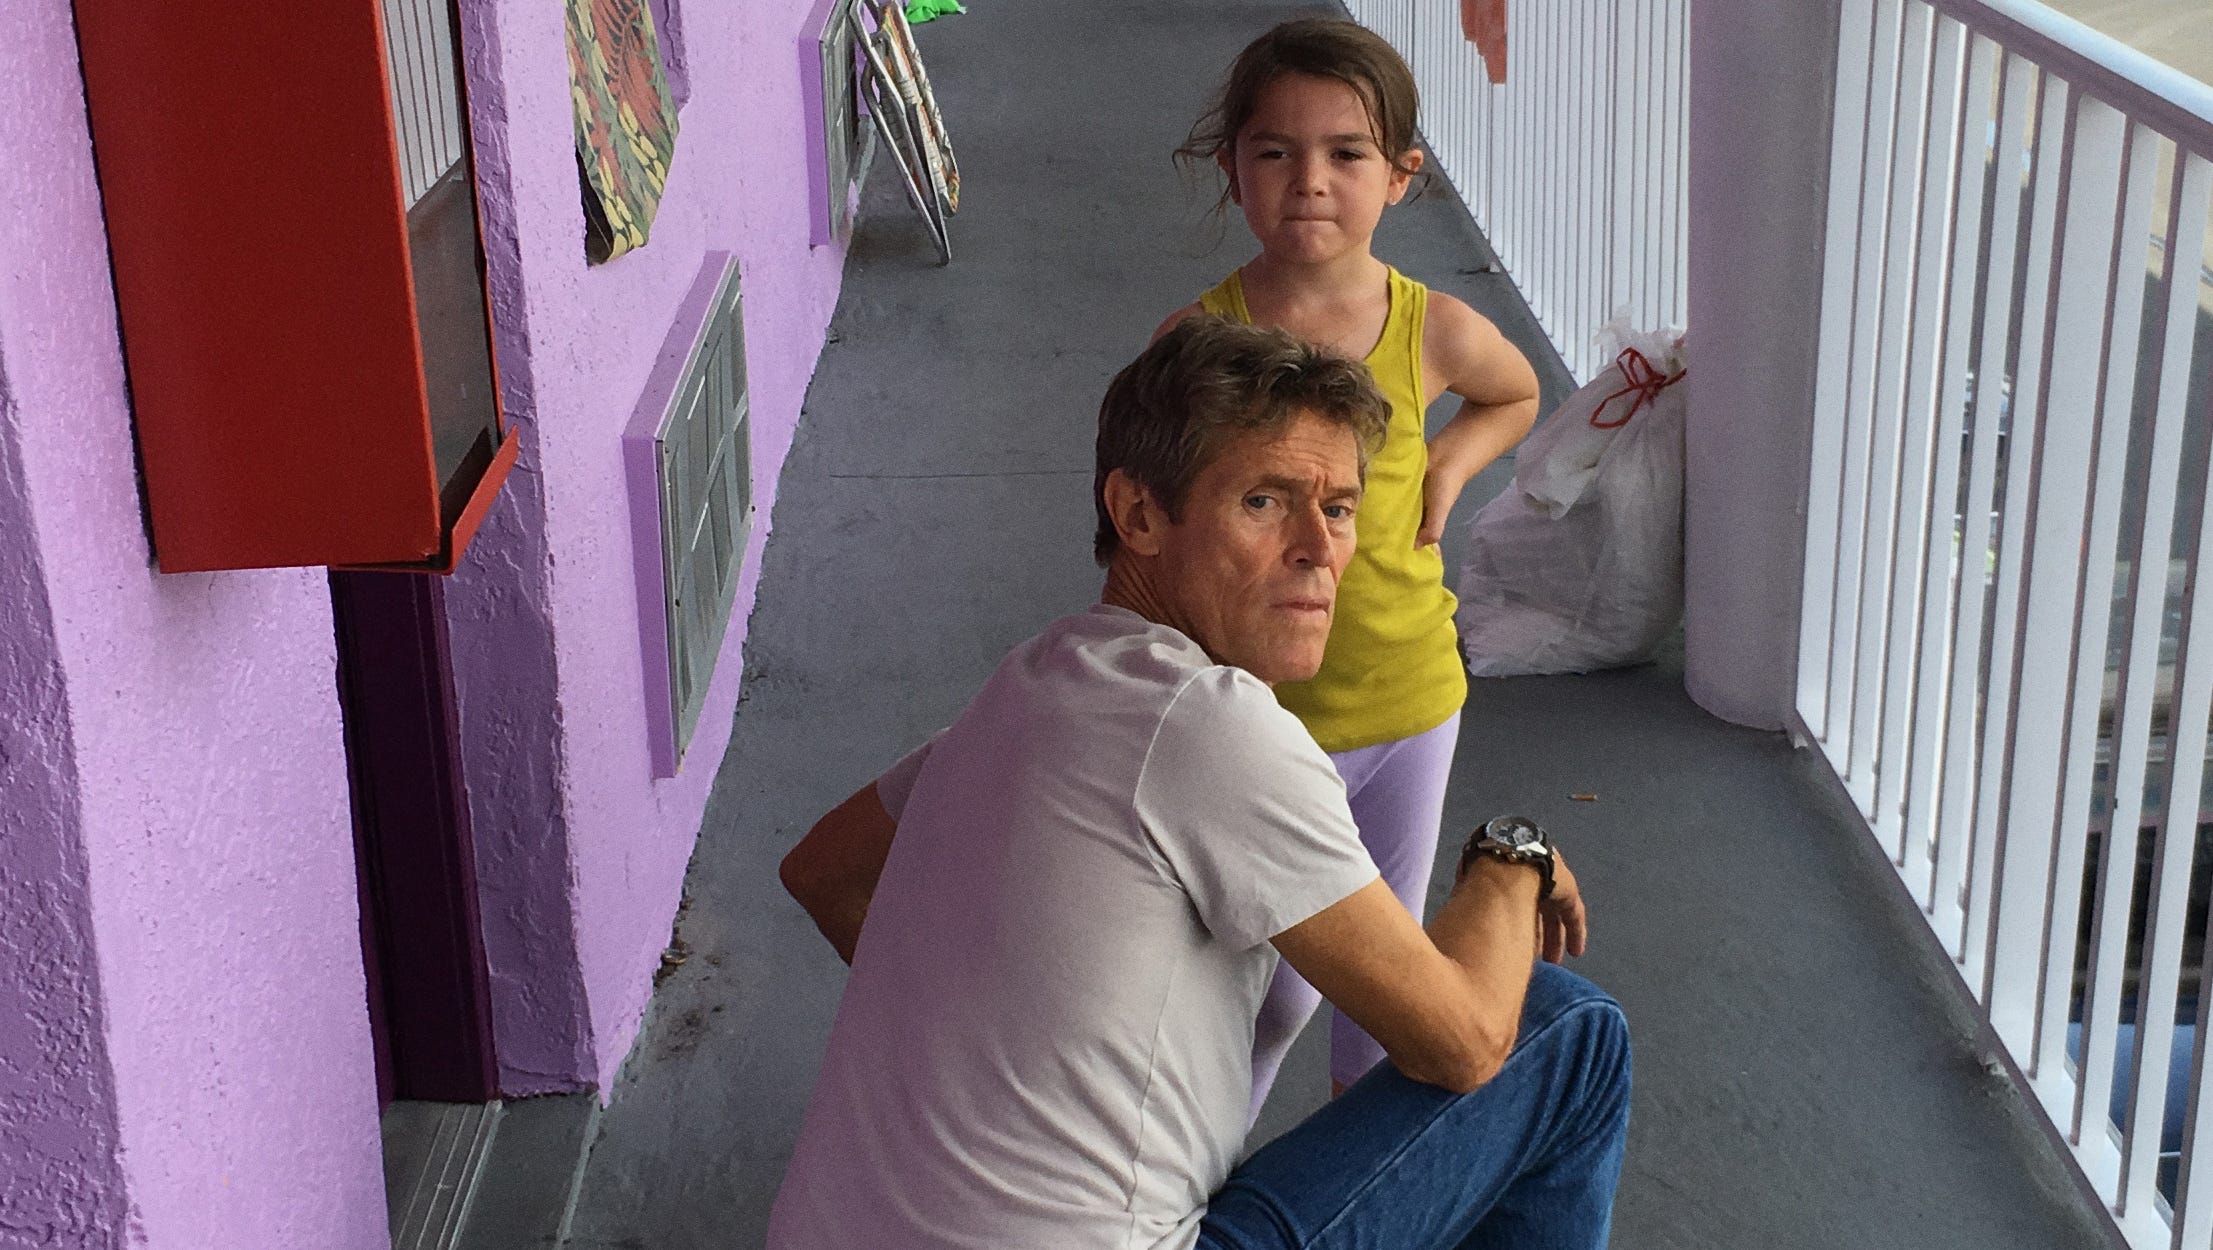 Amateur Barely Legal - Cannes breakout 'Florida Project' shows darker side of Disney World